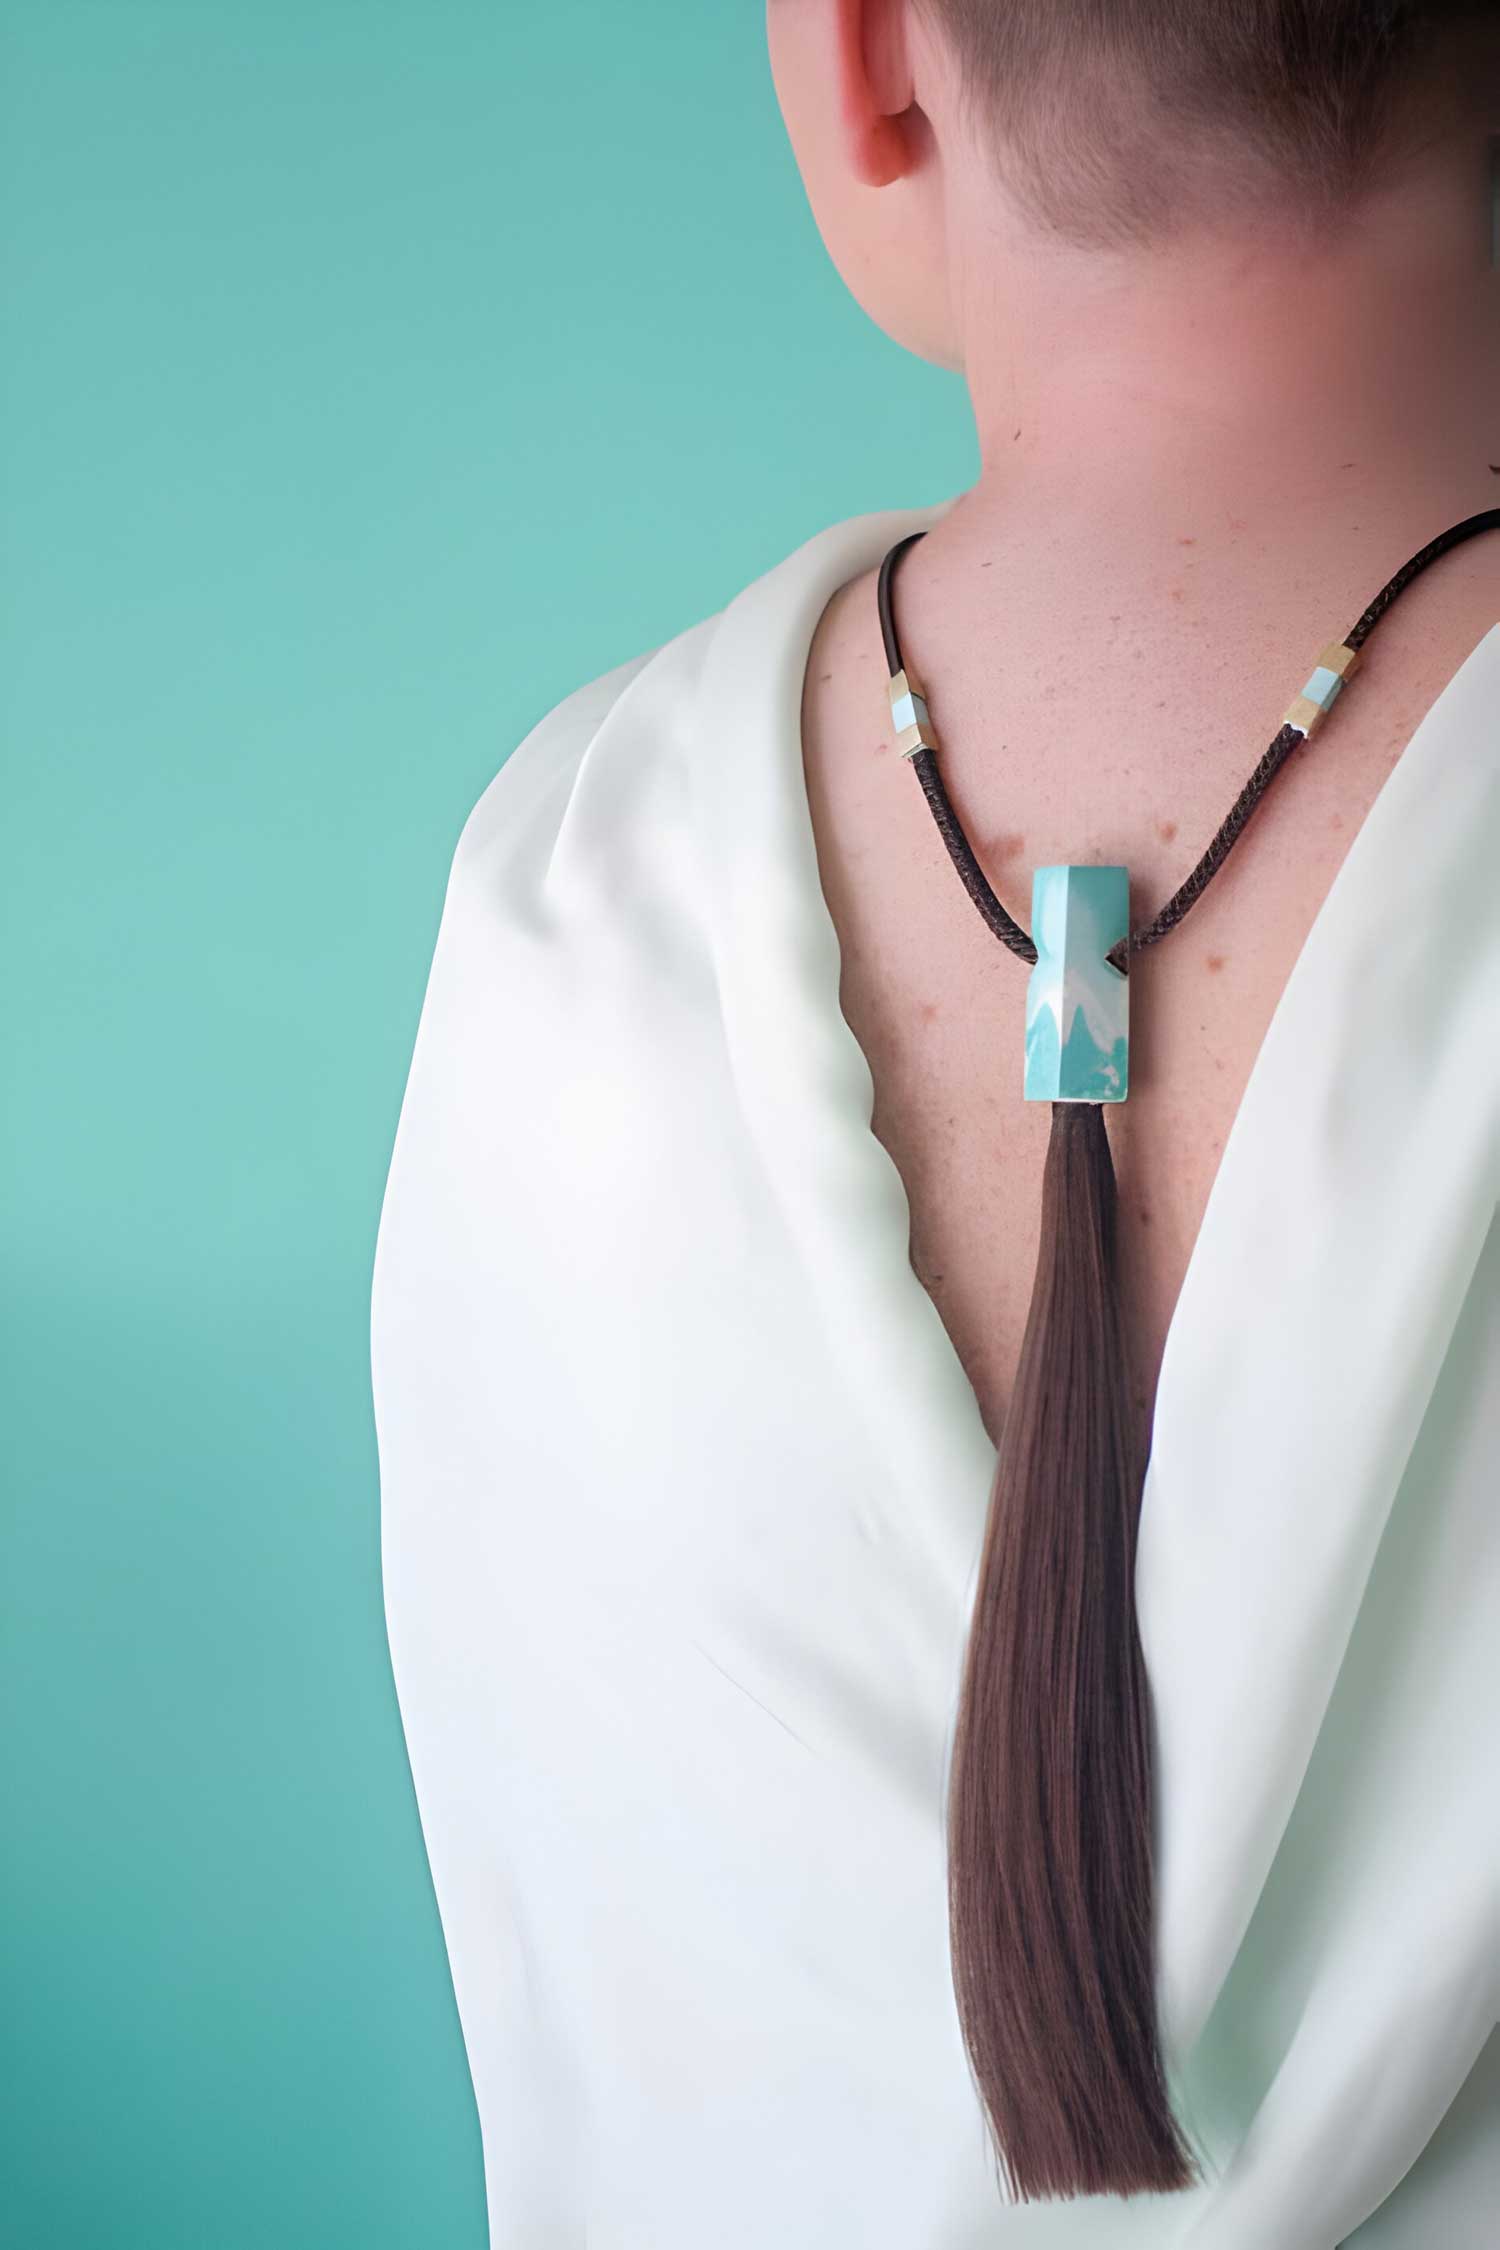 Sybille Paulsen Creates Jewelry With Human Hair For Cancer Patients